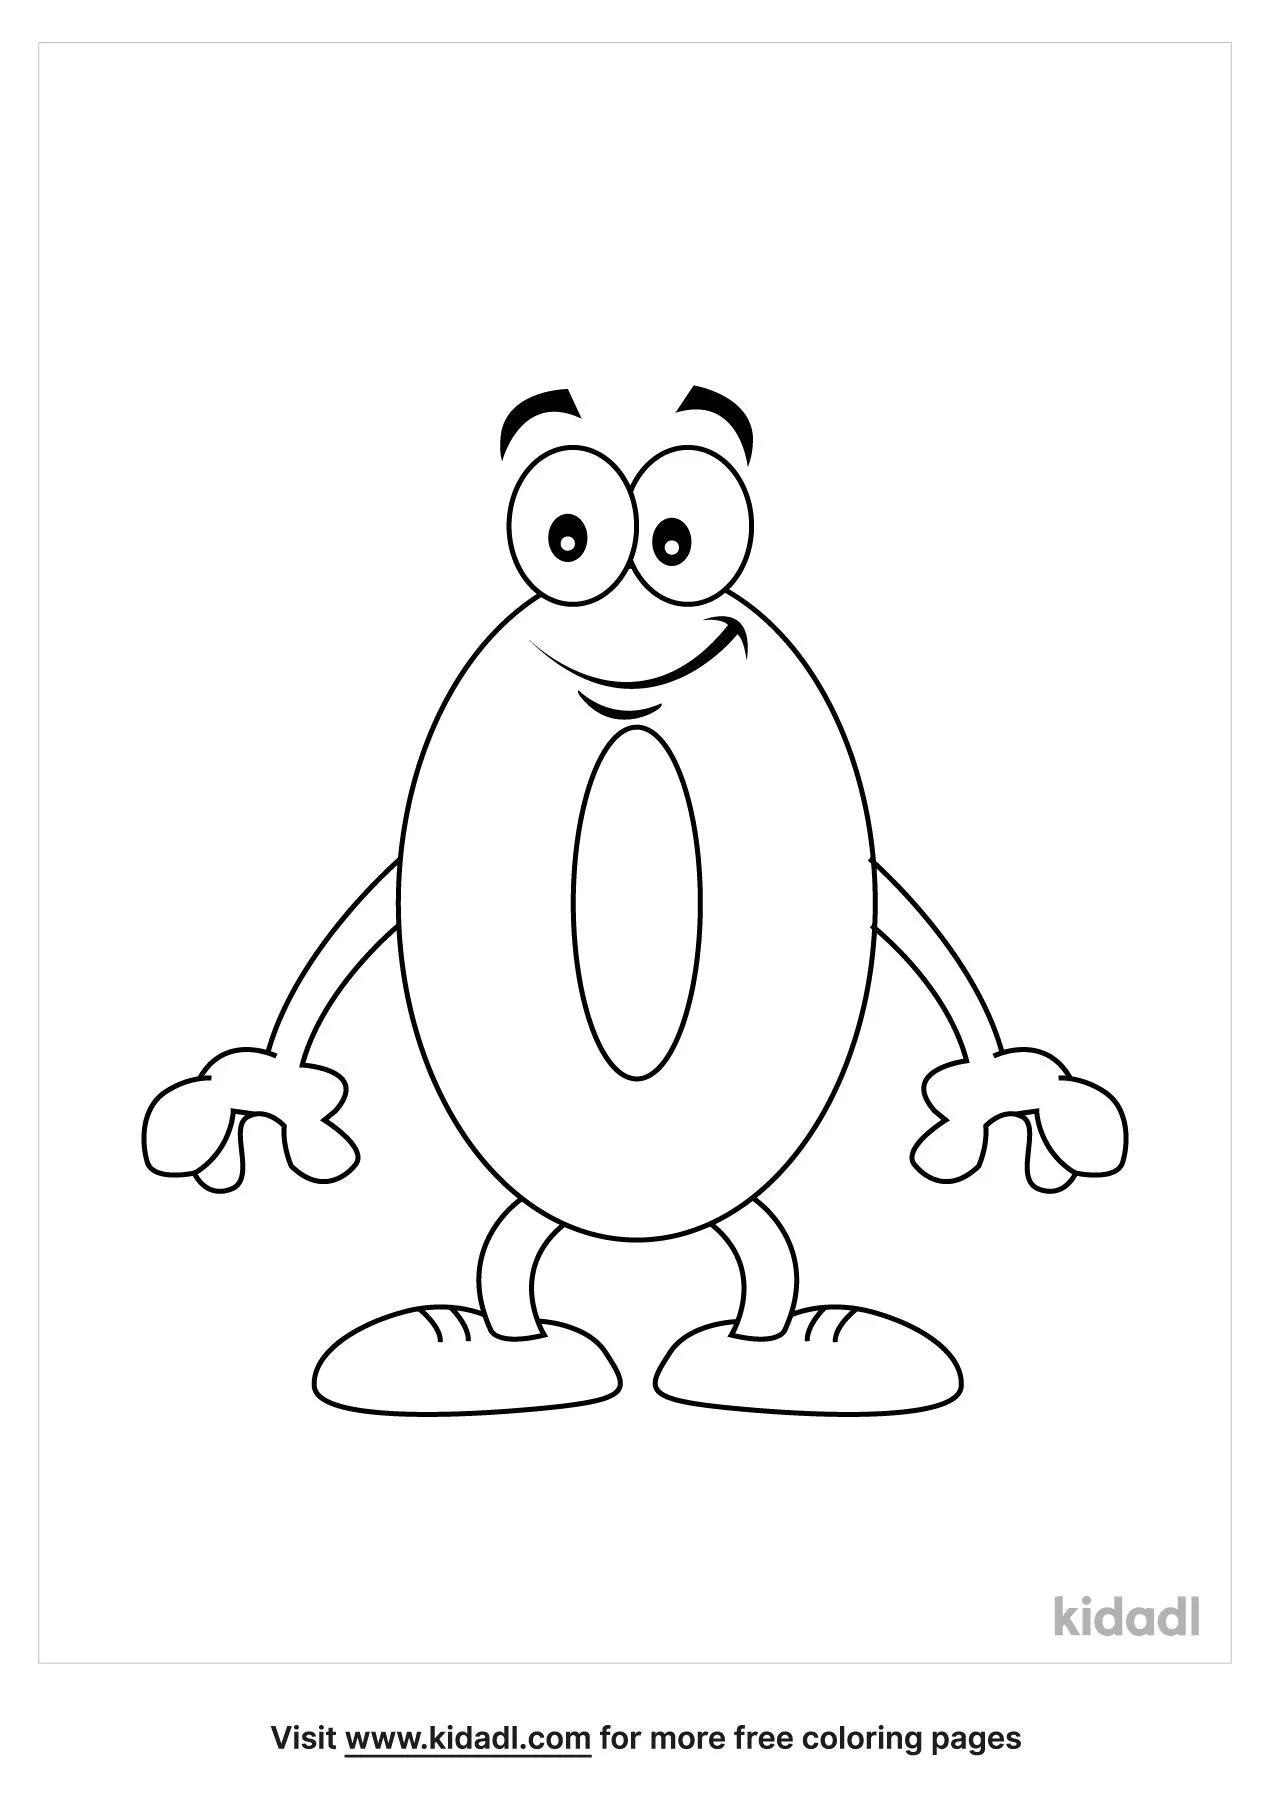 Free zero coloring page coloring page printables